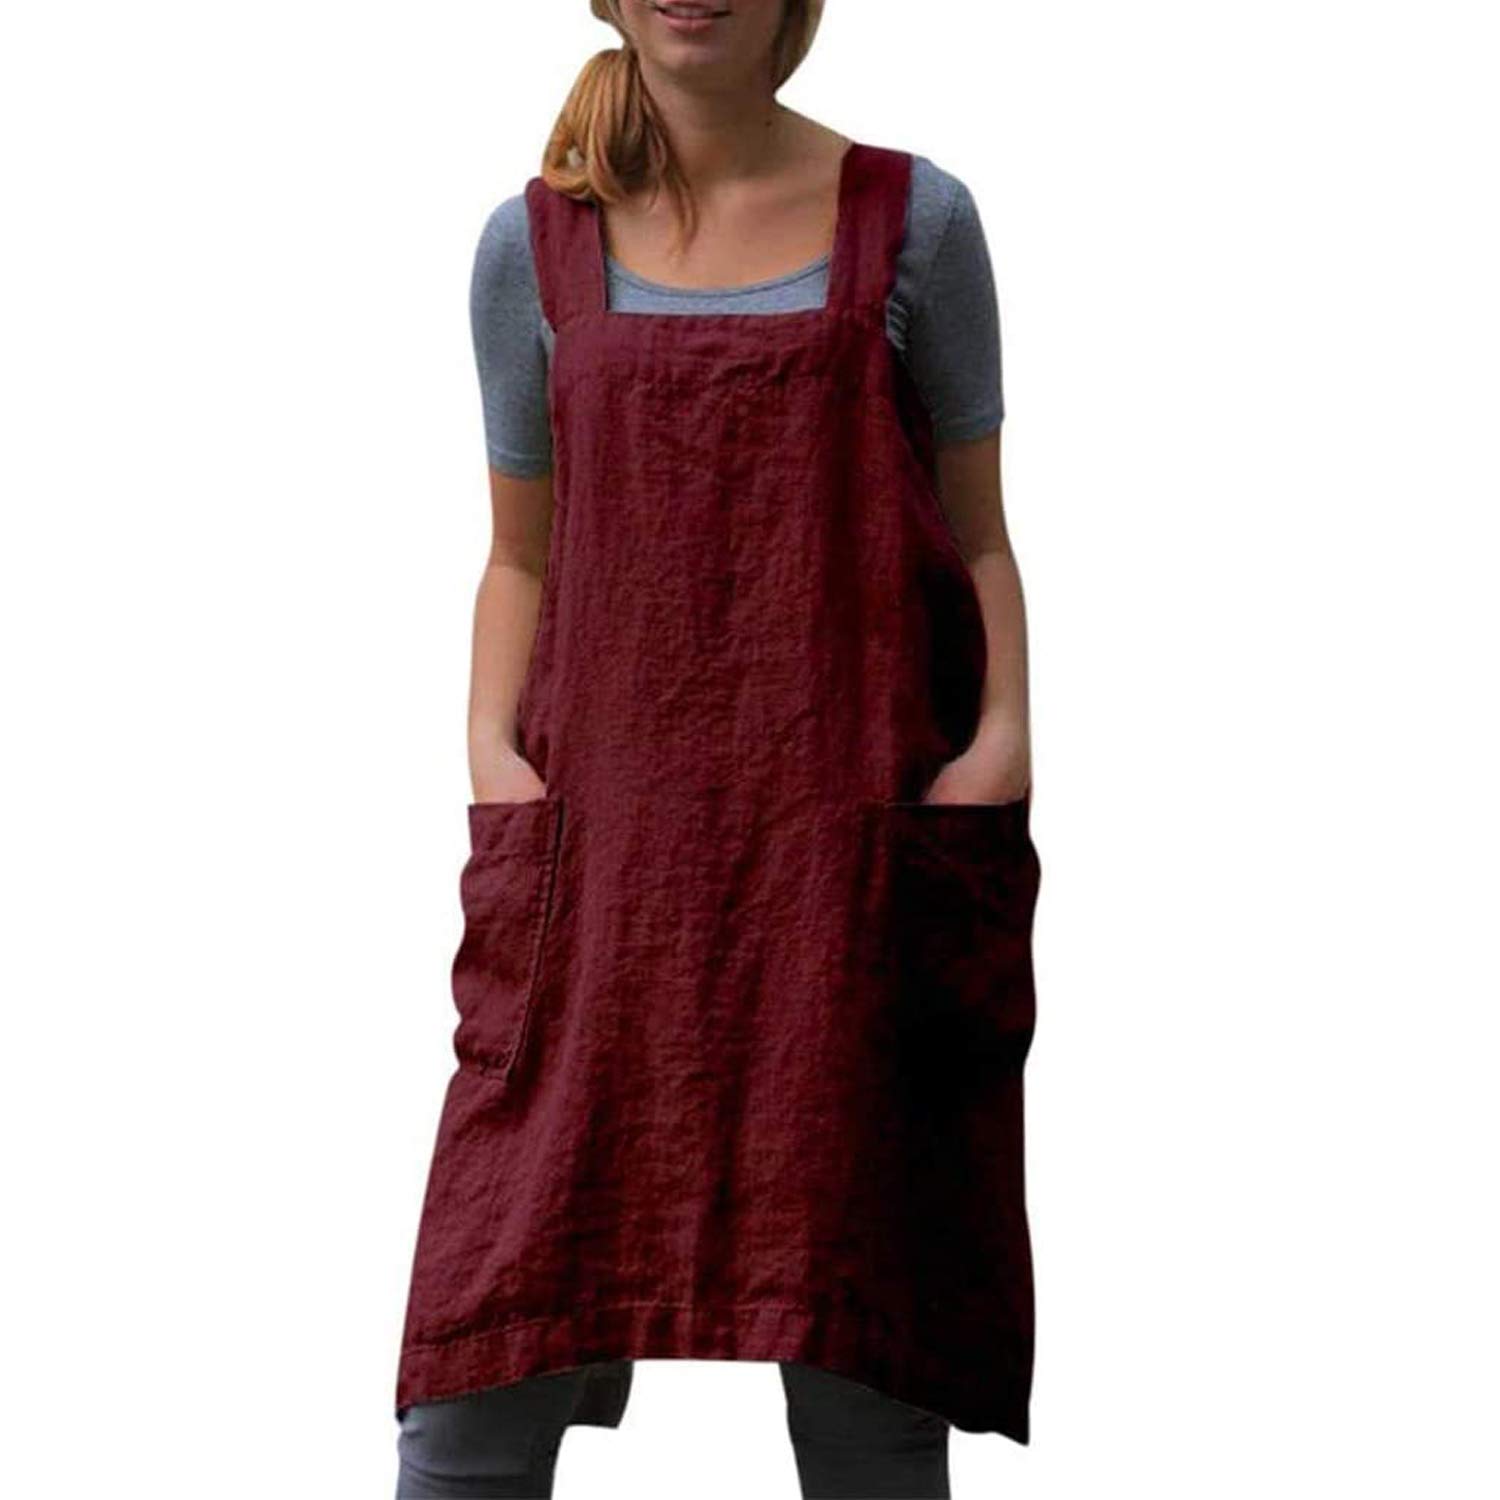 YESDOOD Cotton Linen Apron Cross Back Apron for Women with Pockets Pinafore Dress for Baking Cooking